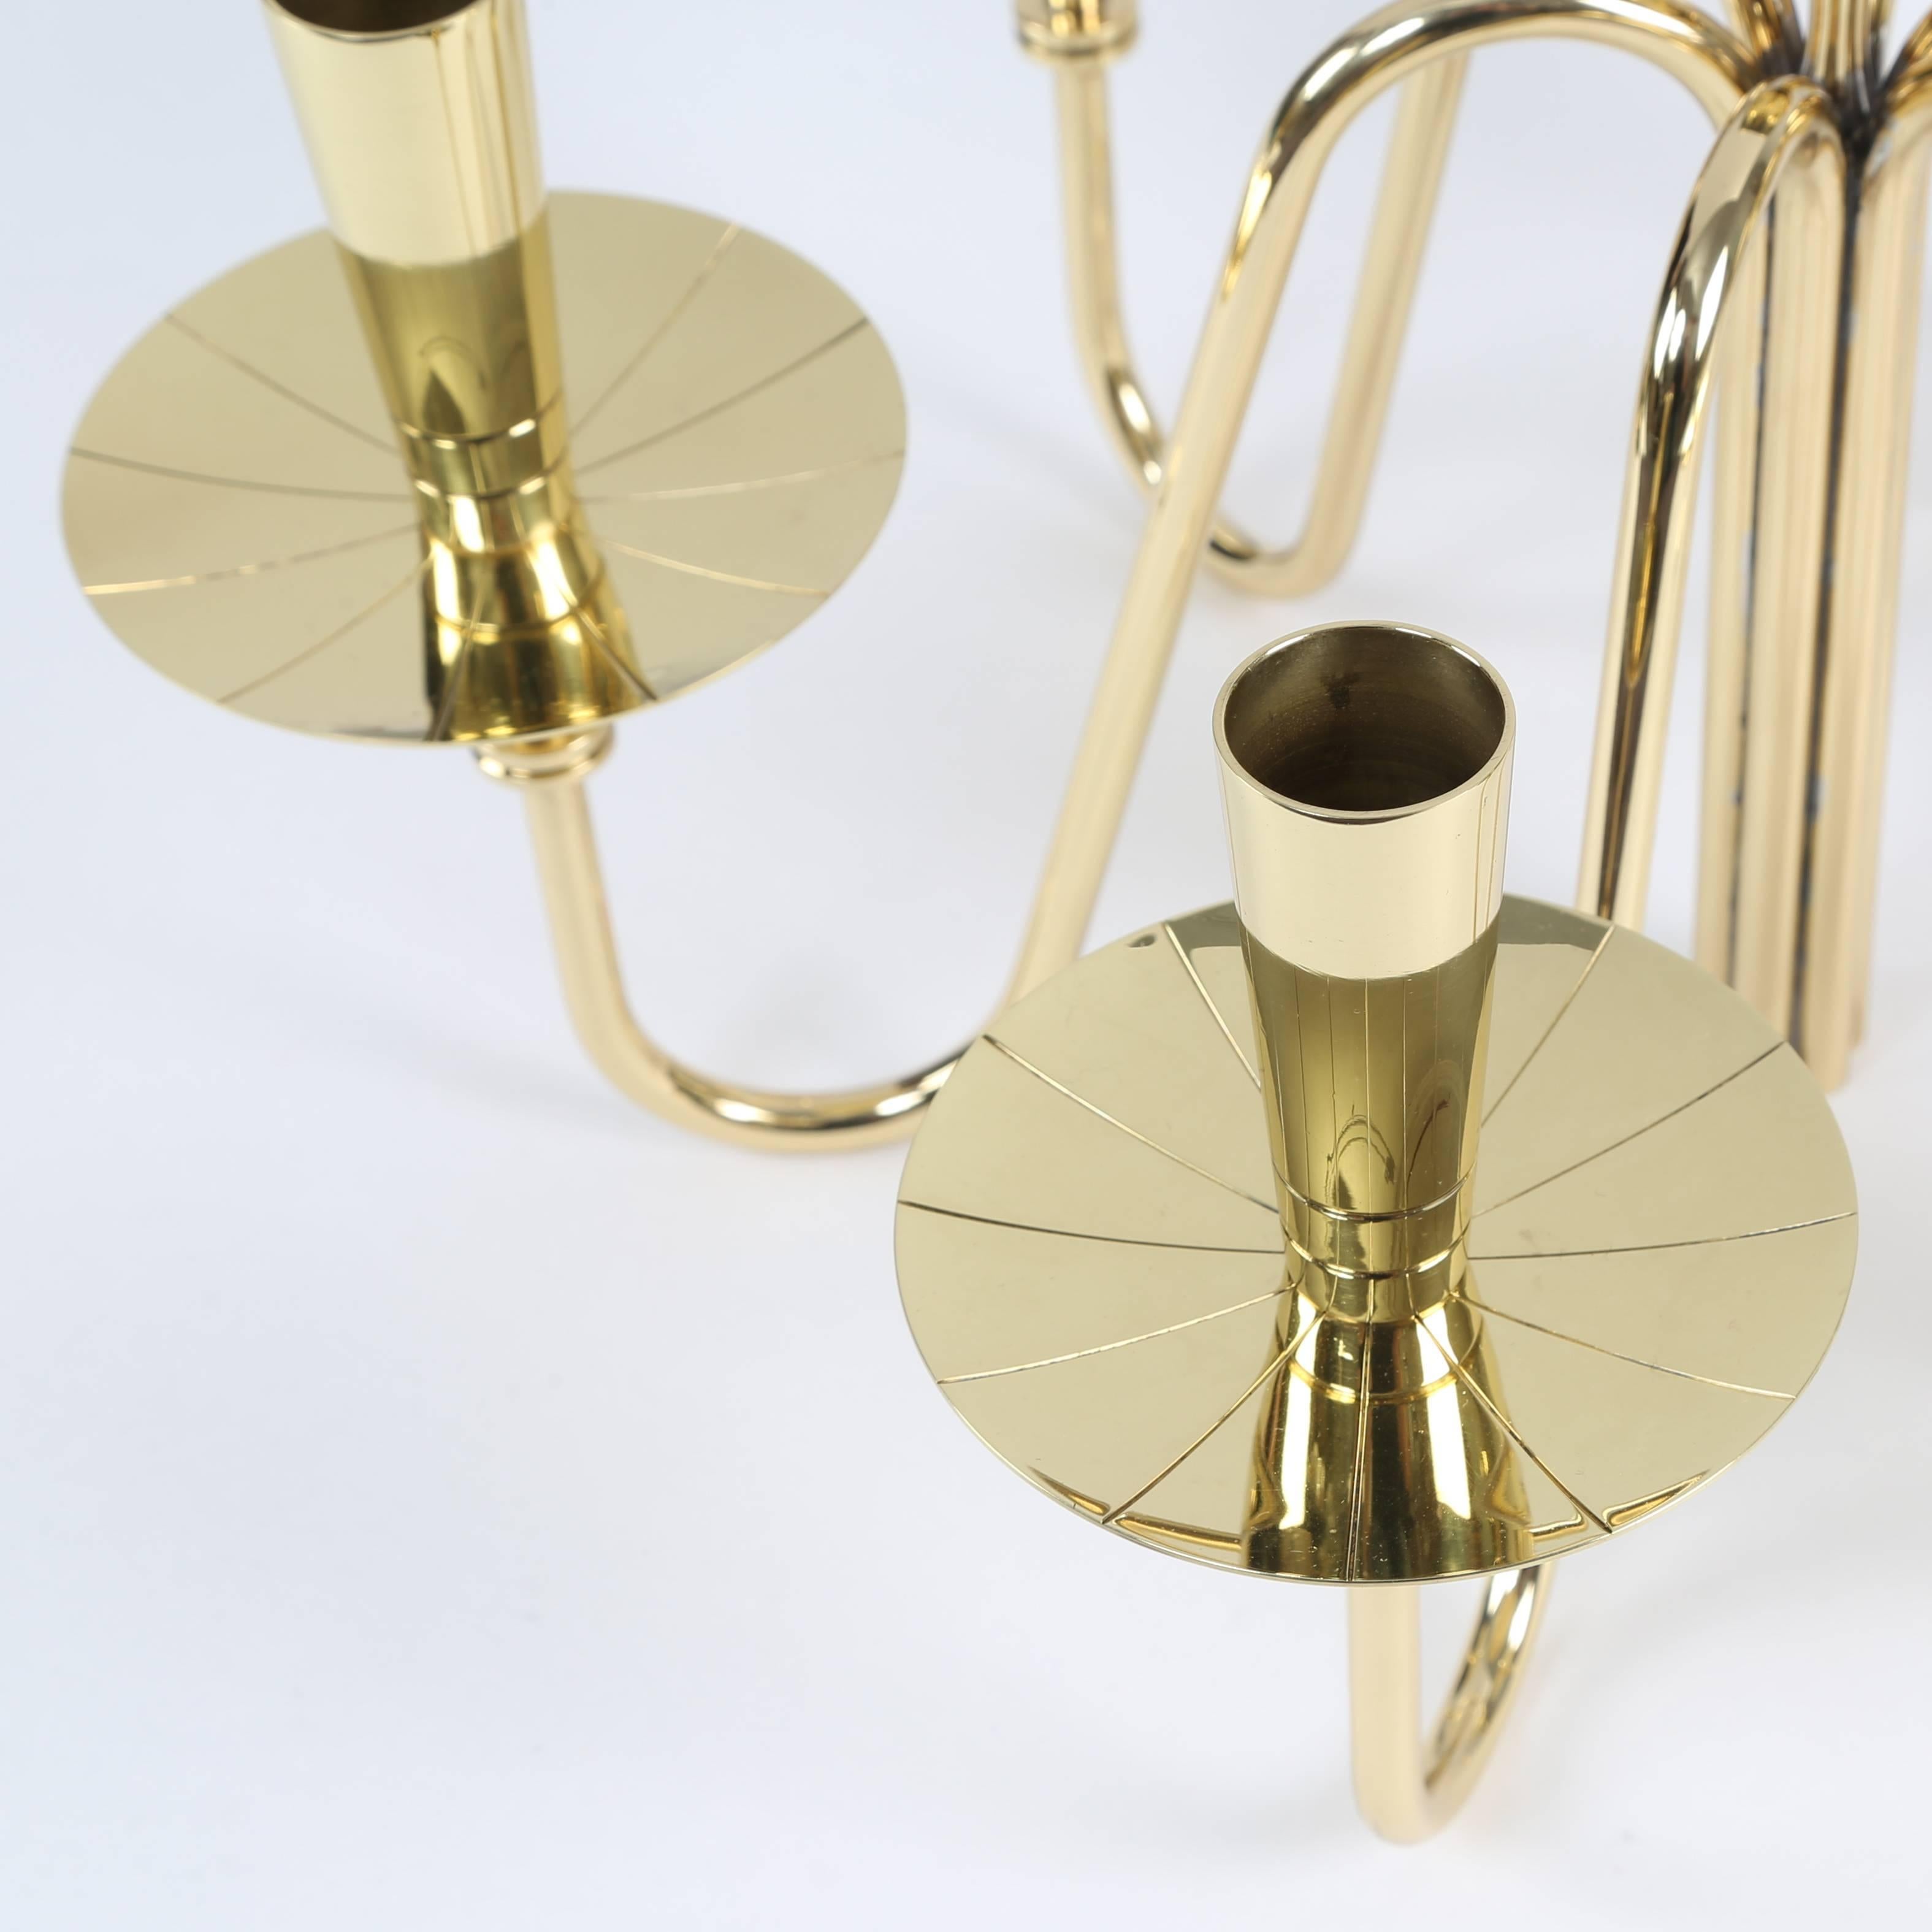 Pair of 1950s Brass Tommi Parzinger Candelabra In Good Condition For Sale In Brooklyn, NY